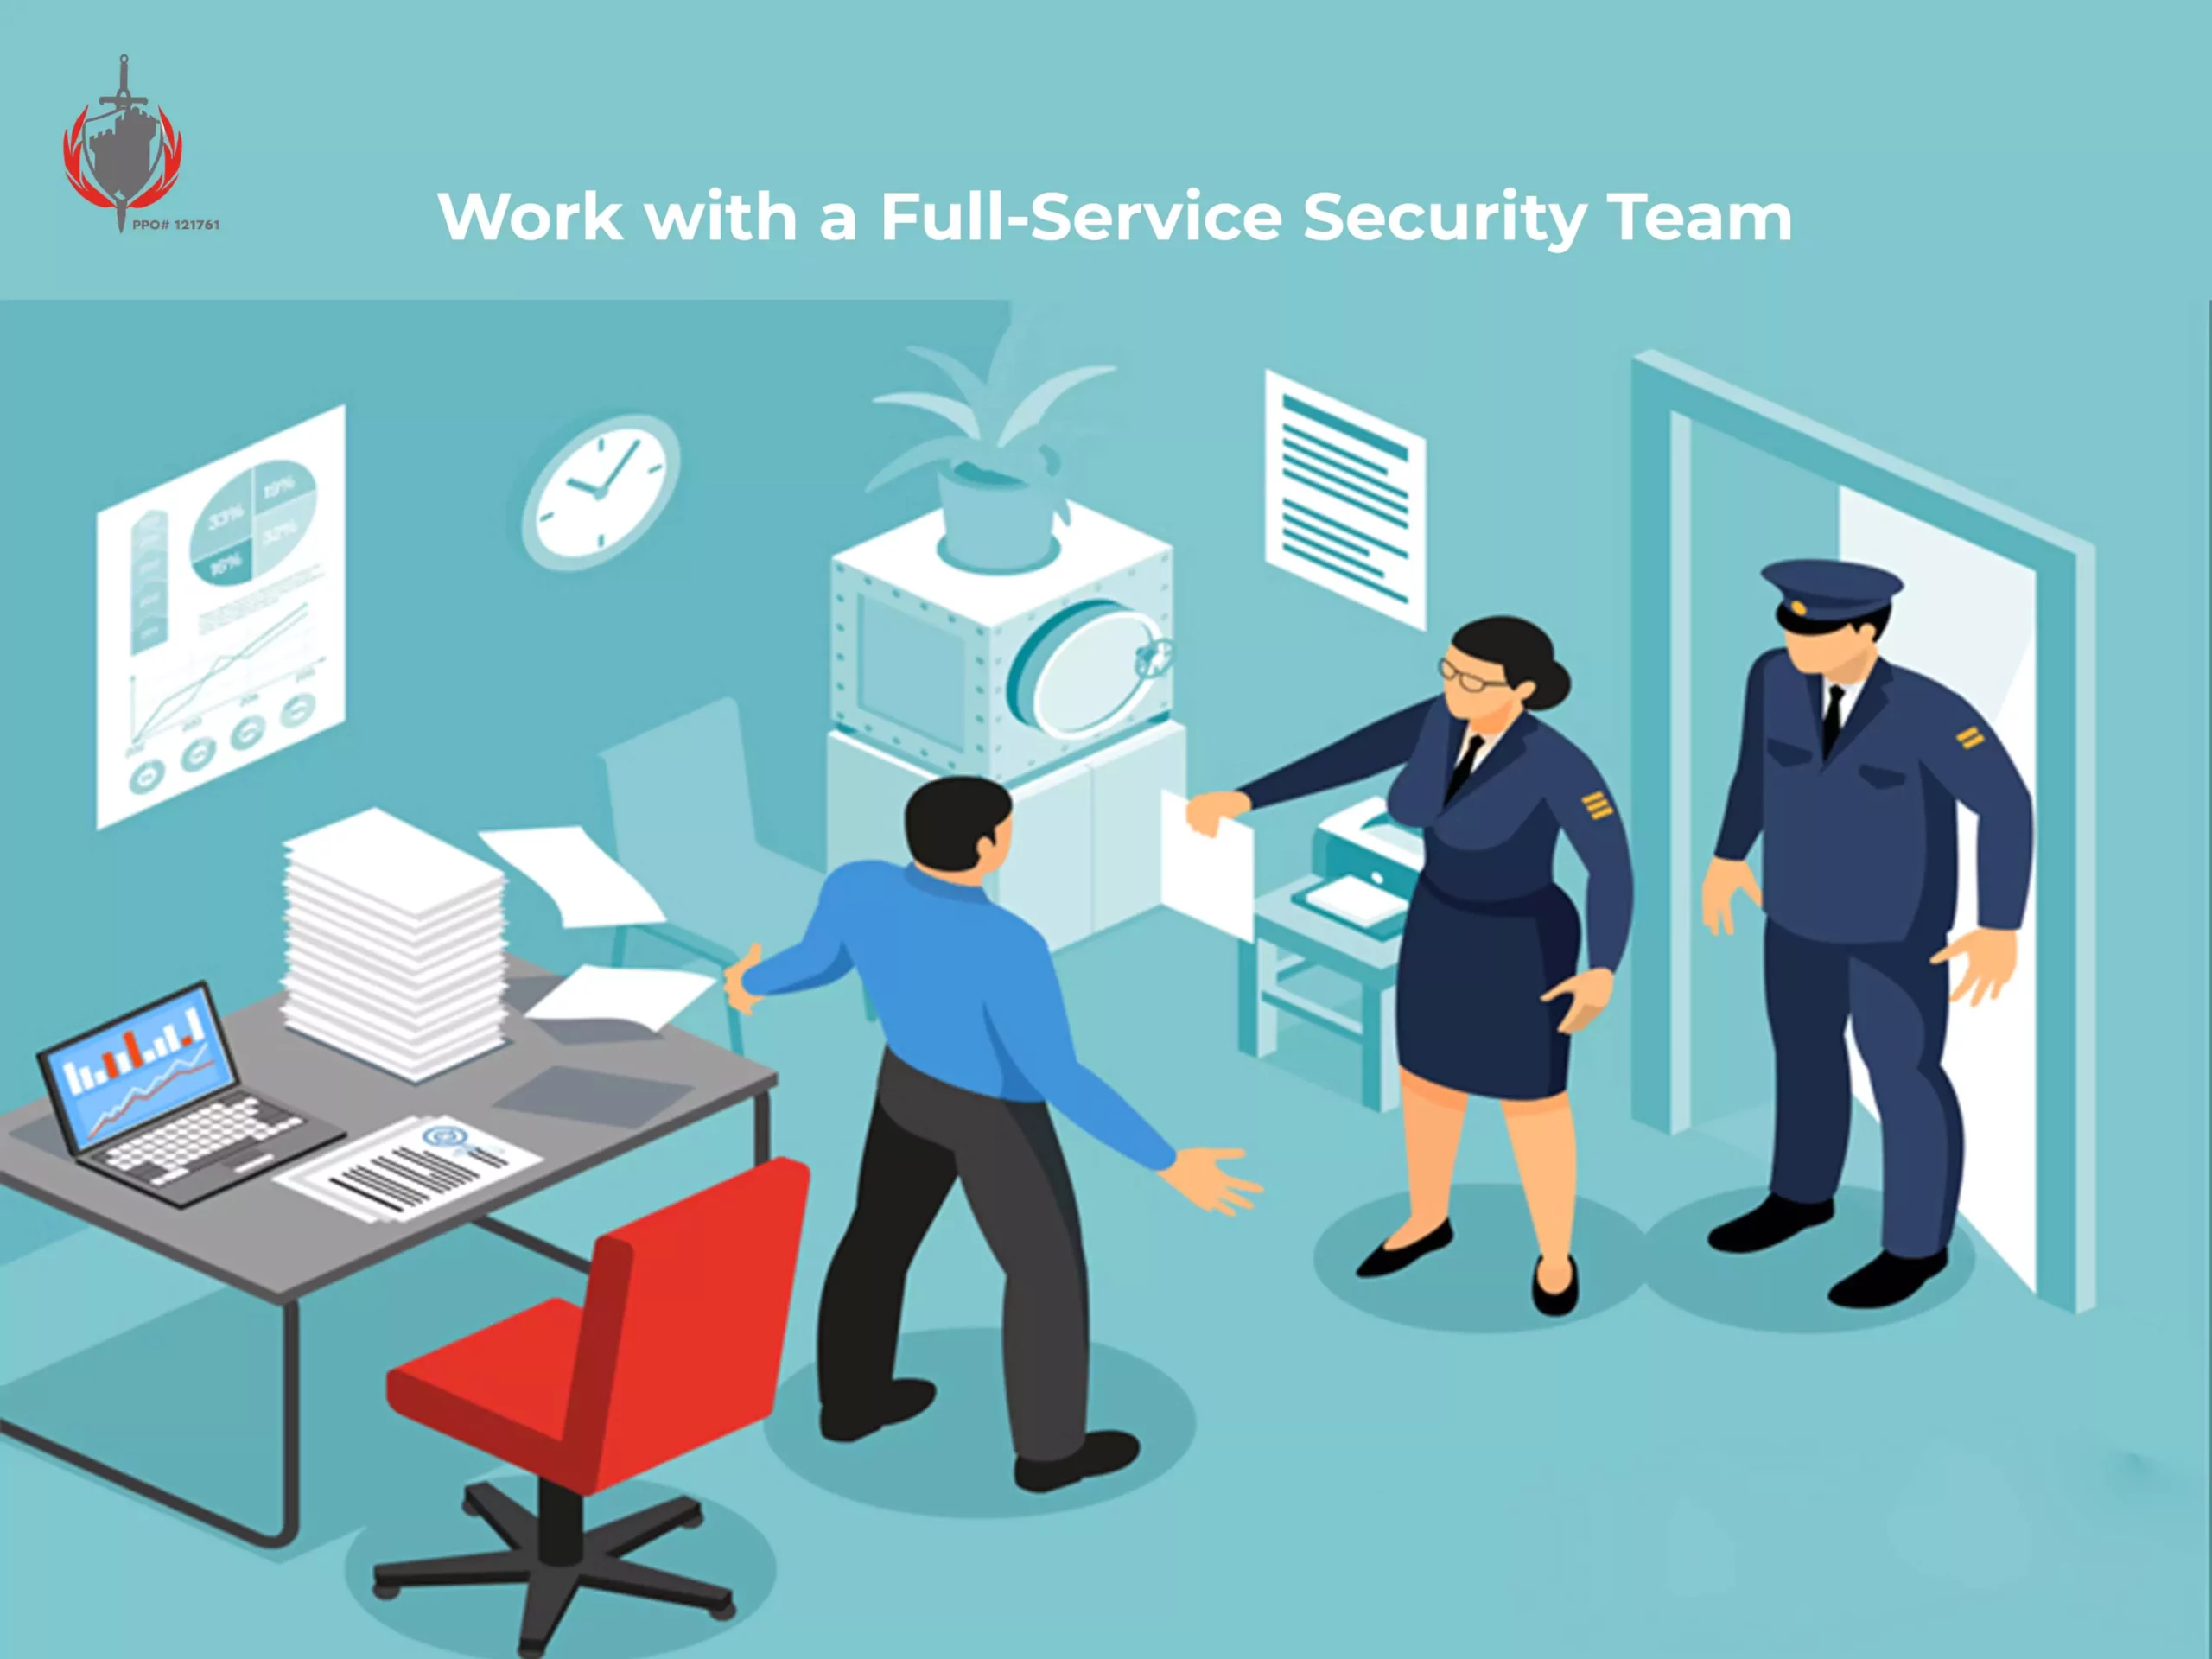 Work with a Full-Service Security Team